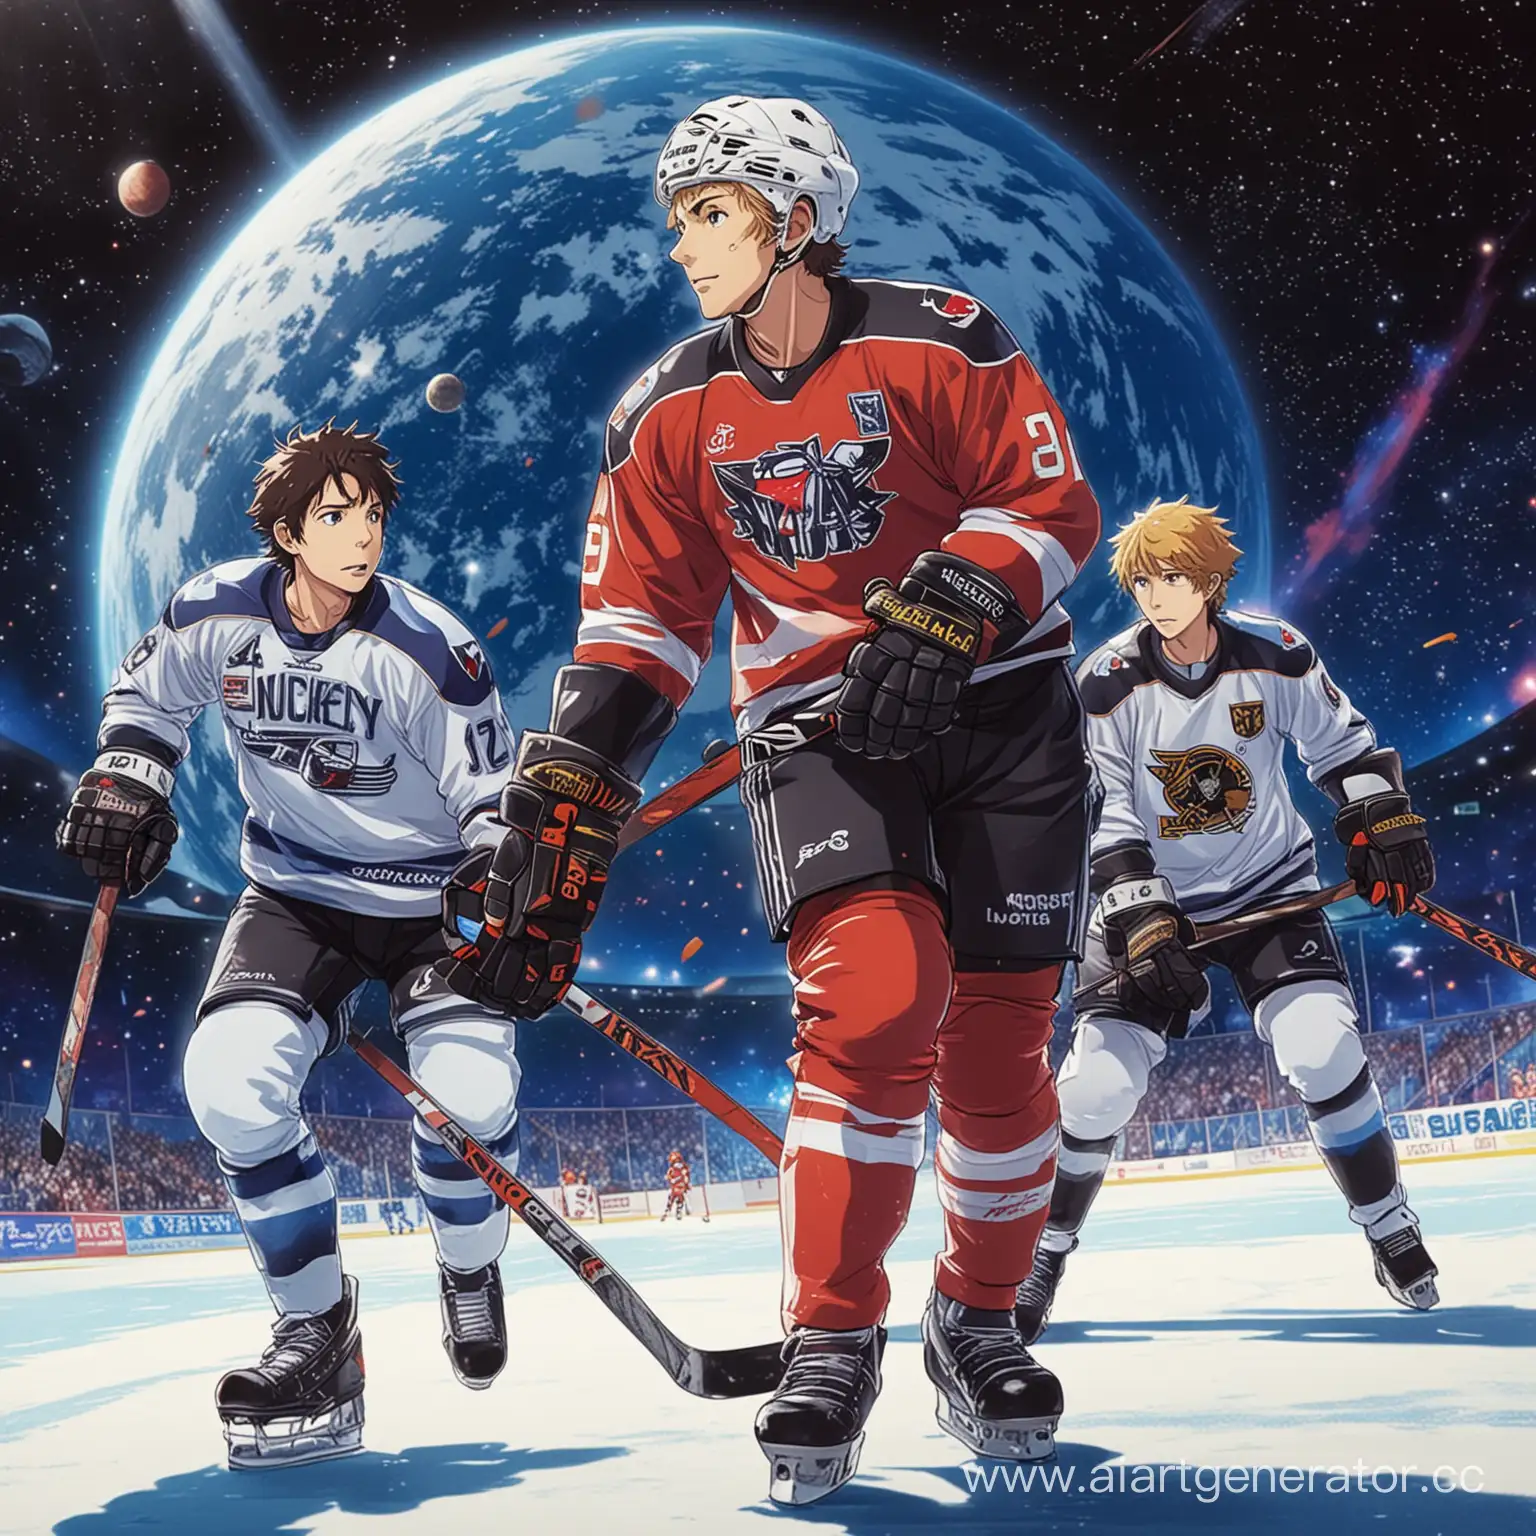 Hockey-Match-in-Space-Summer-Anime-Style